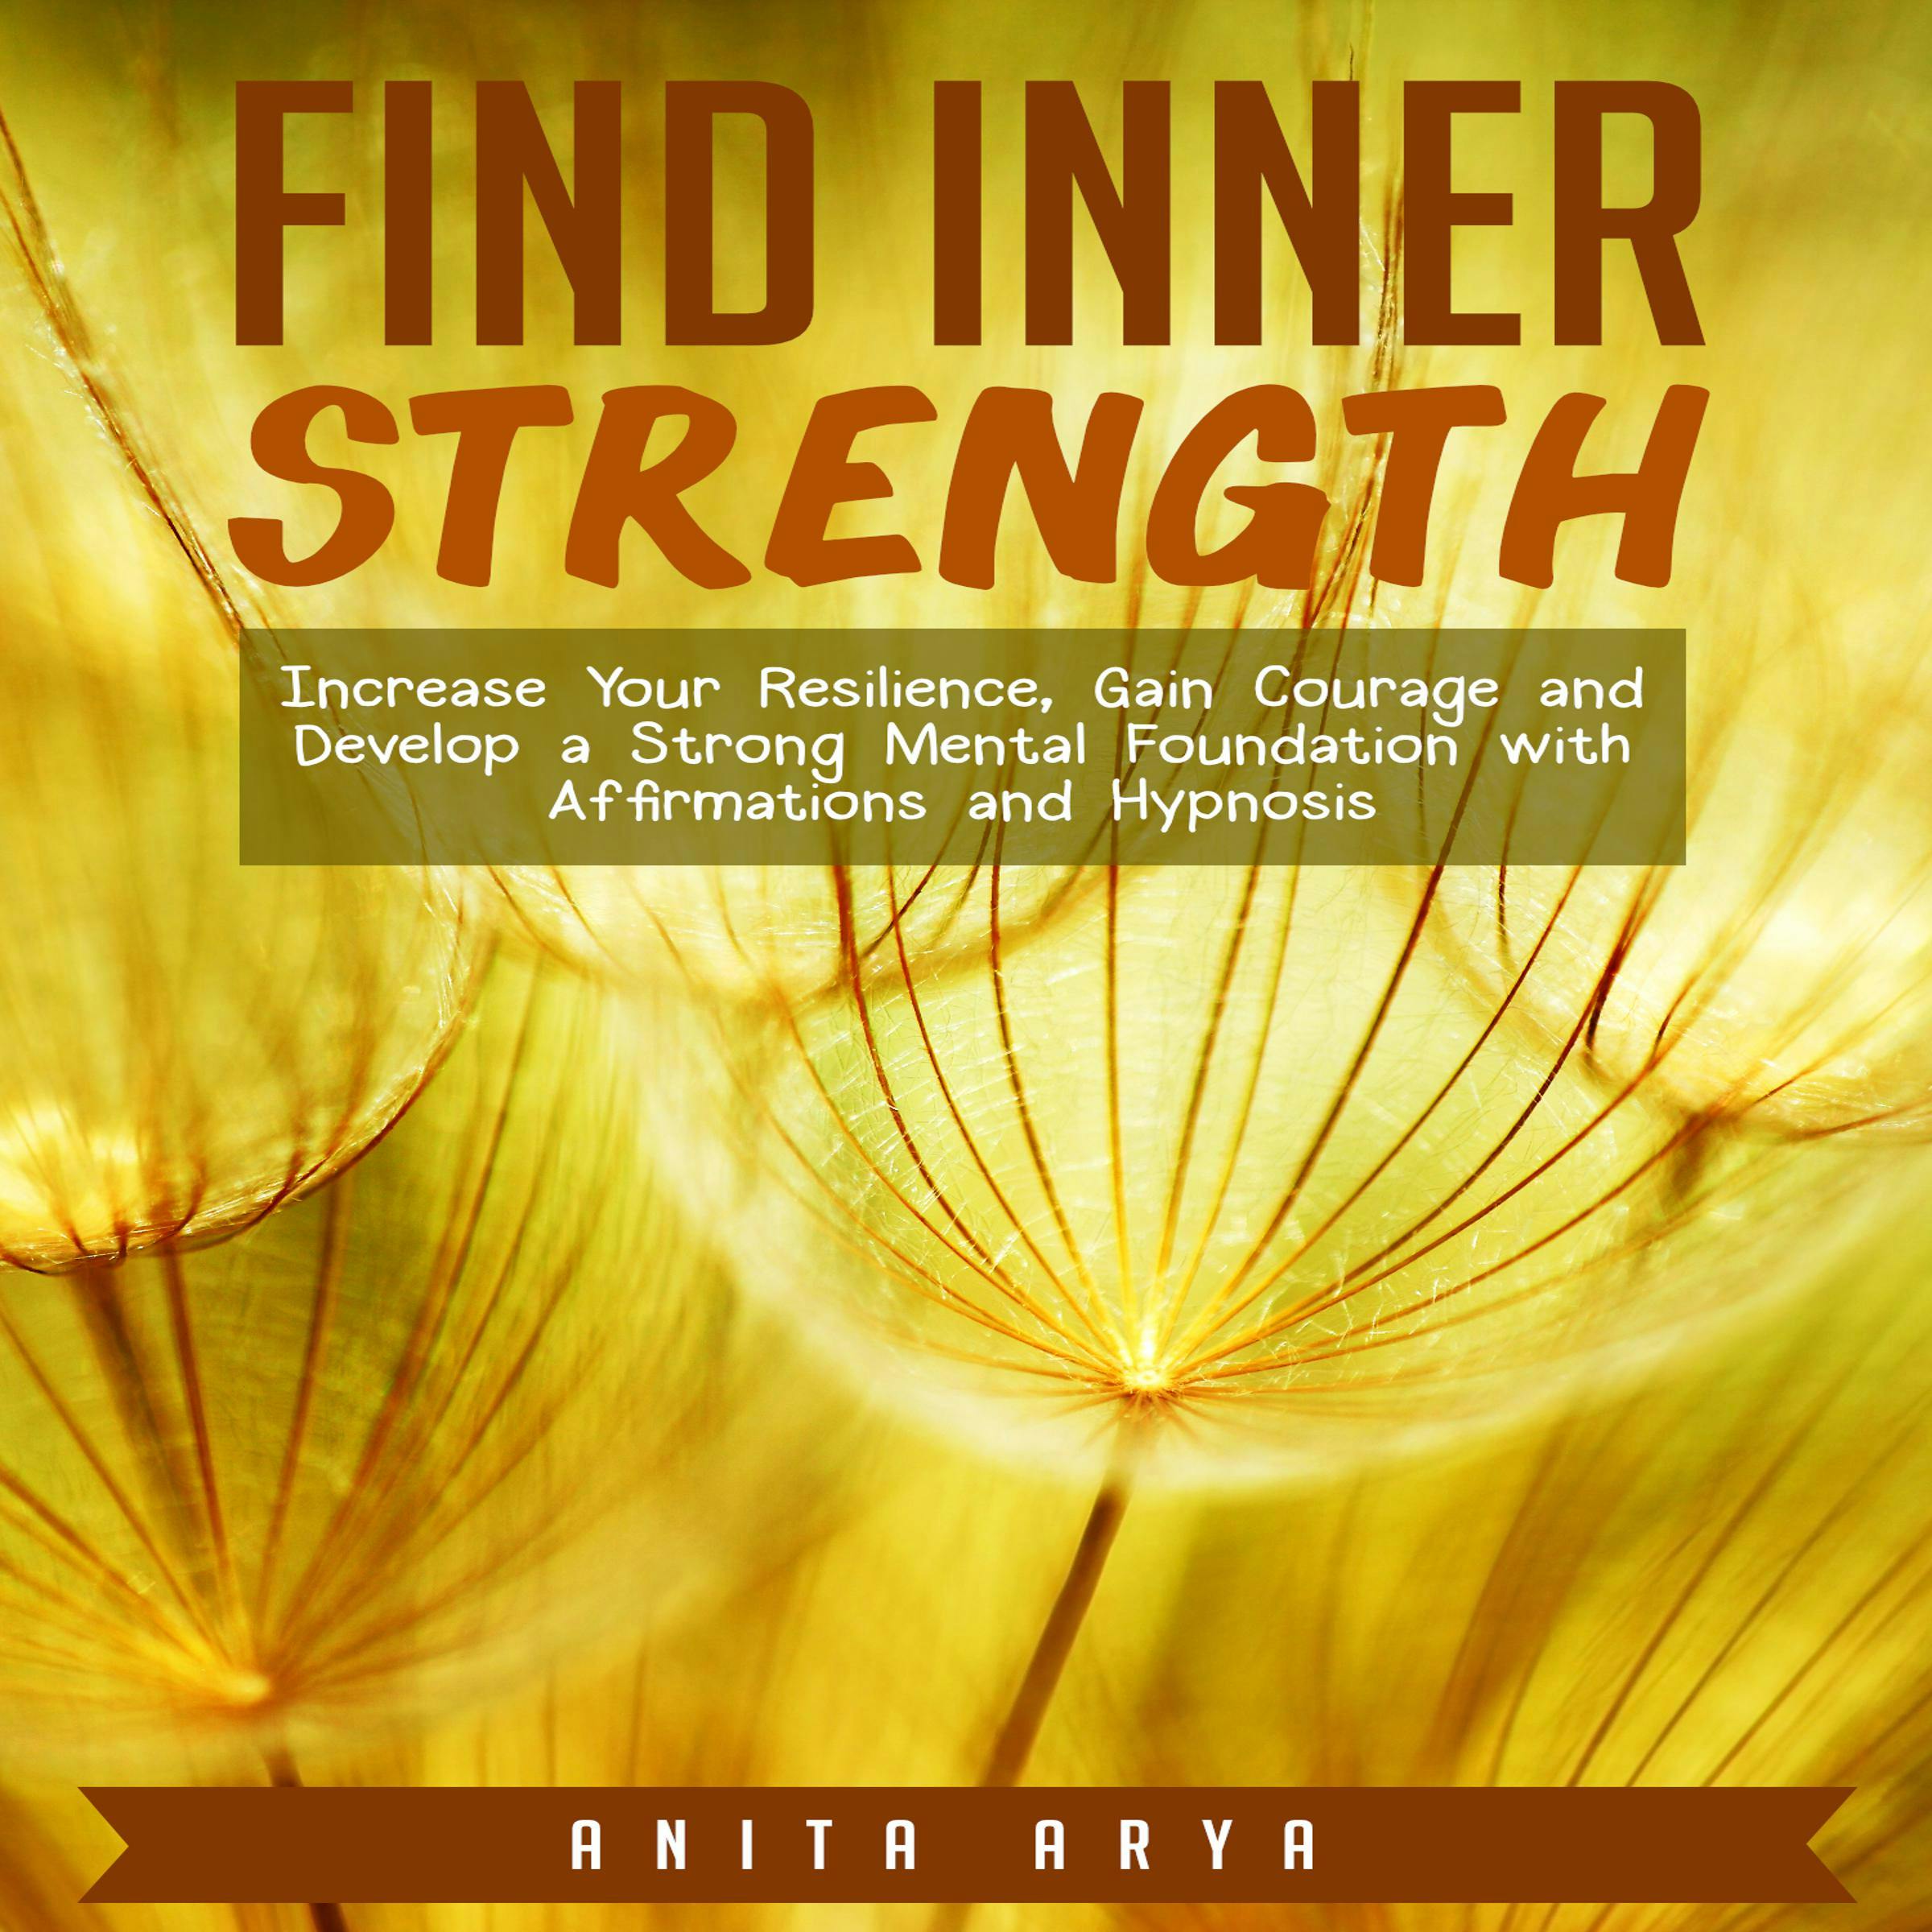 Find Inner Strength: Increase Your Resilience, Gain Courage and Develop a Strong Mental Foundation with Affirmations and Hypnosis - Anita Arya